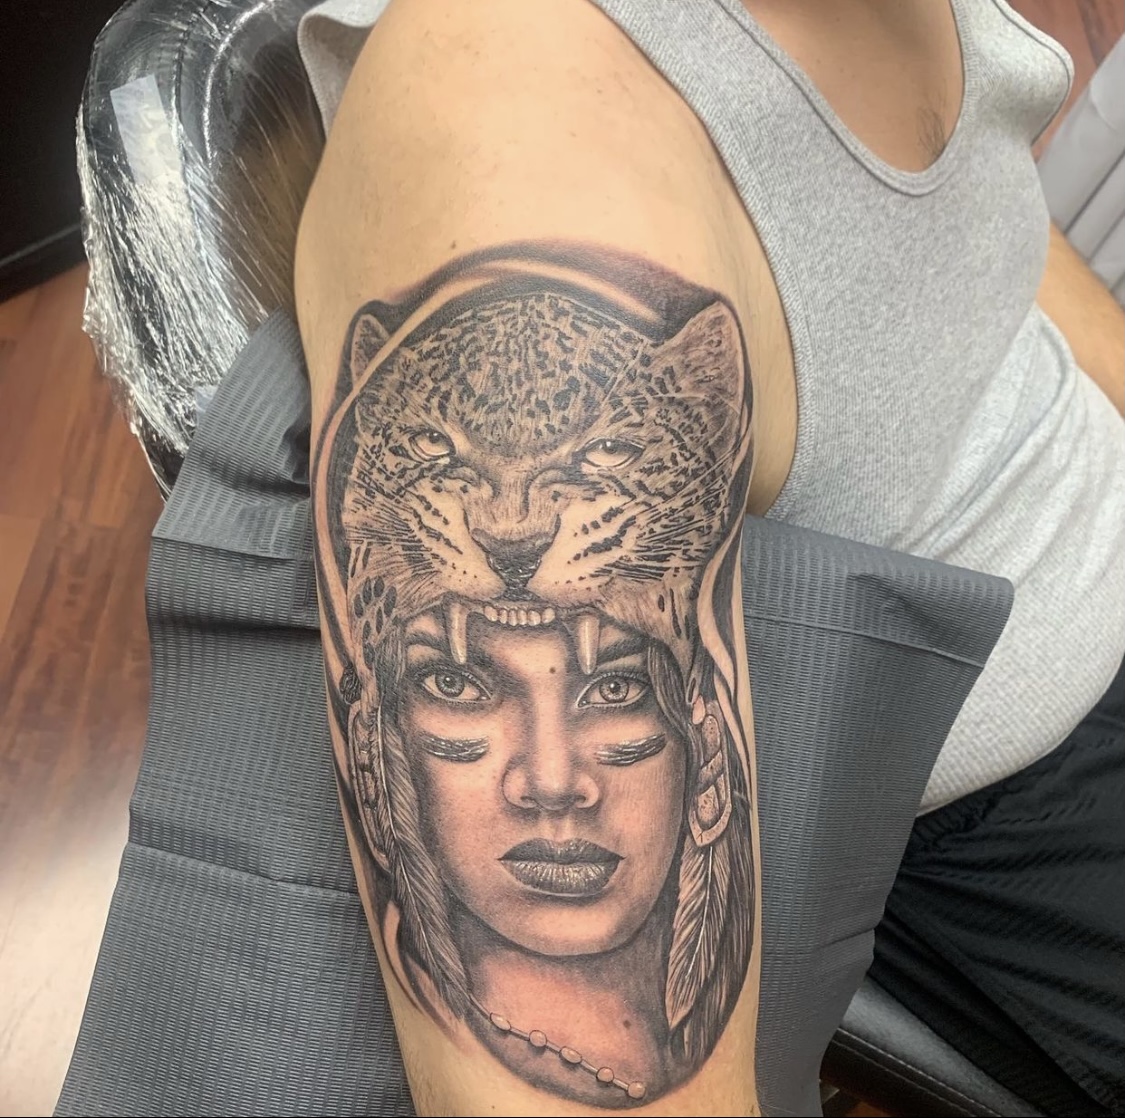 4.8 ⭐ Chicago Ink Tattoo & Body Piercing Reviews by Real Customers 2023